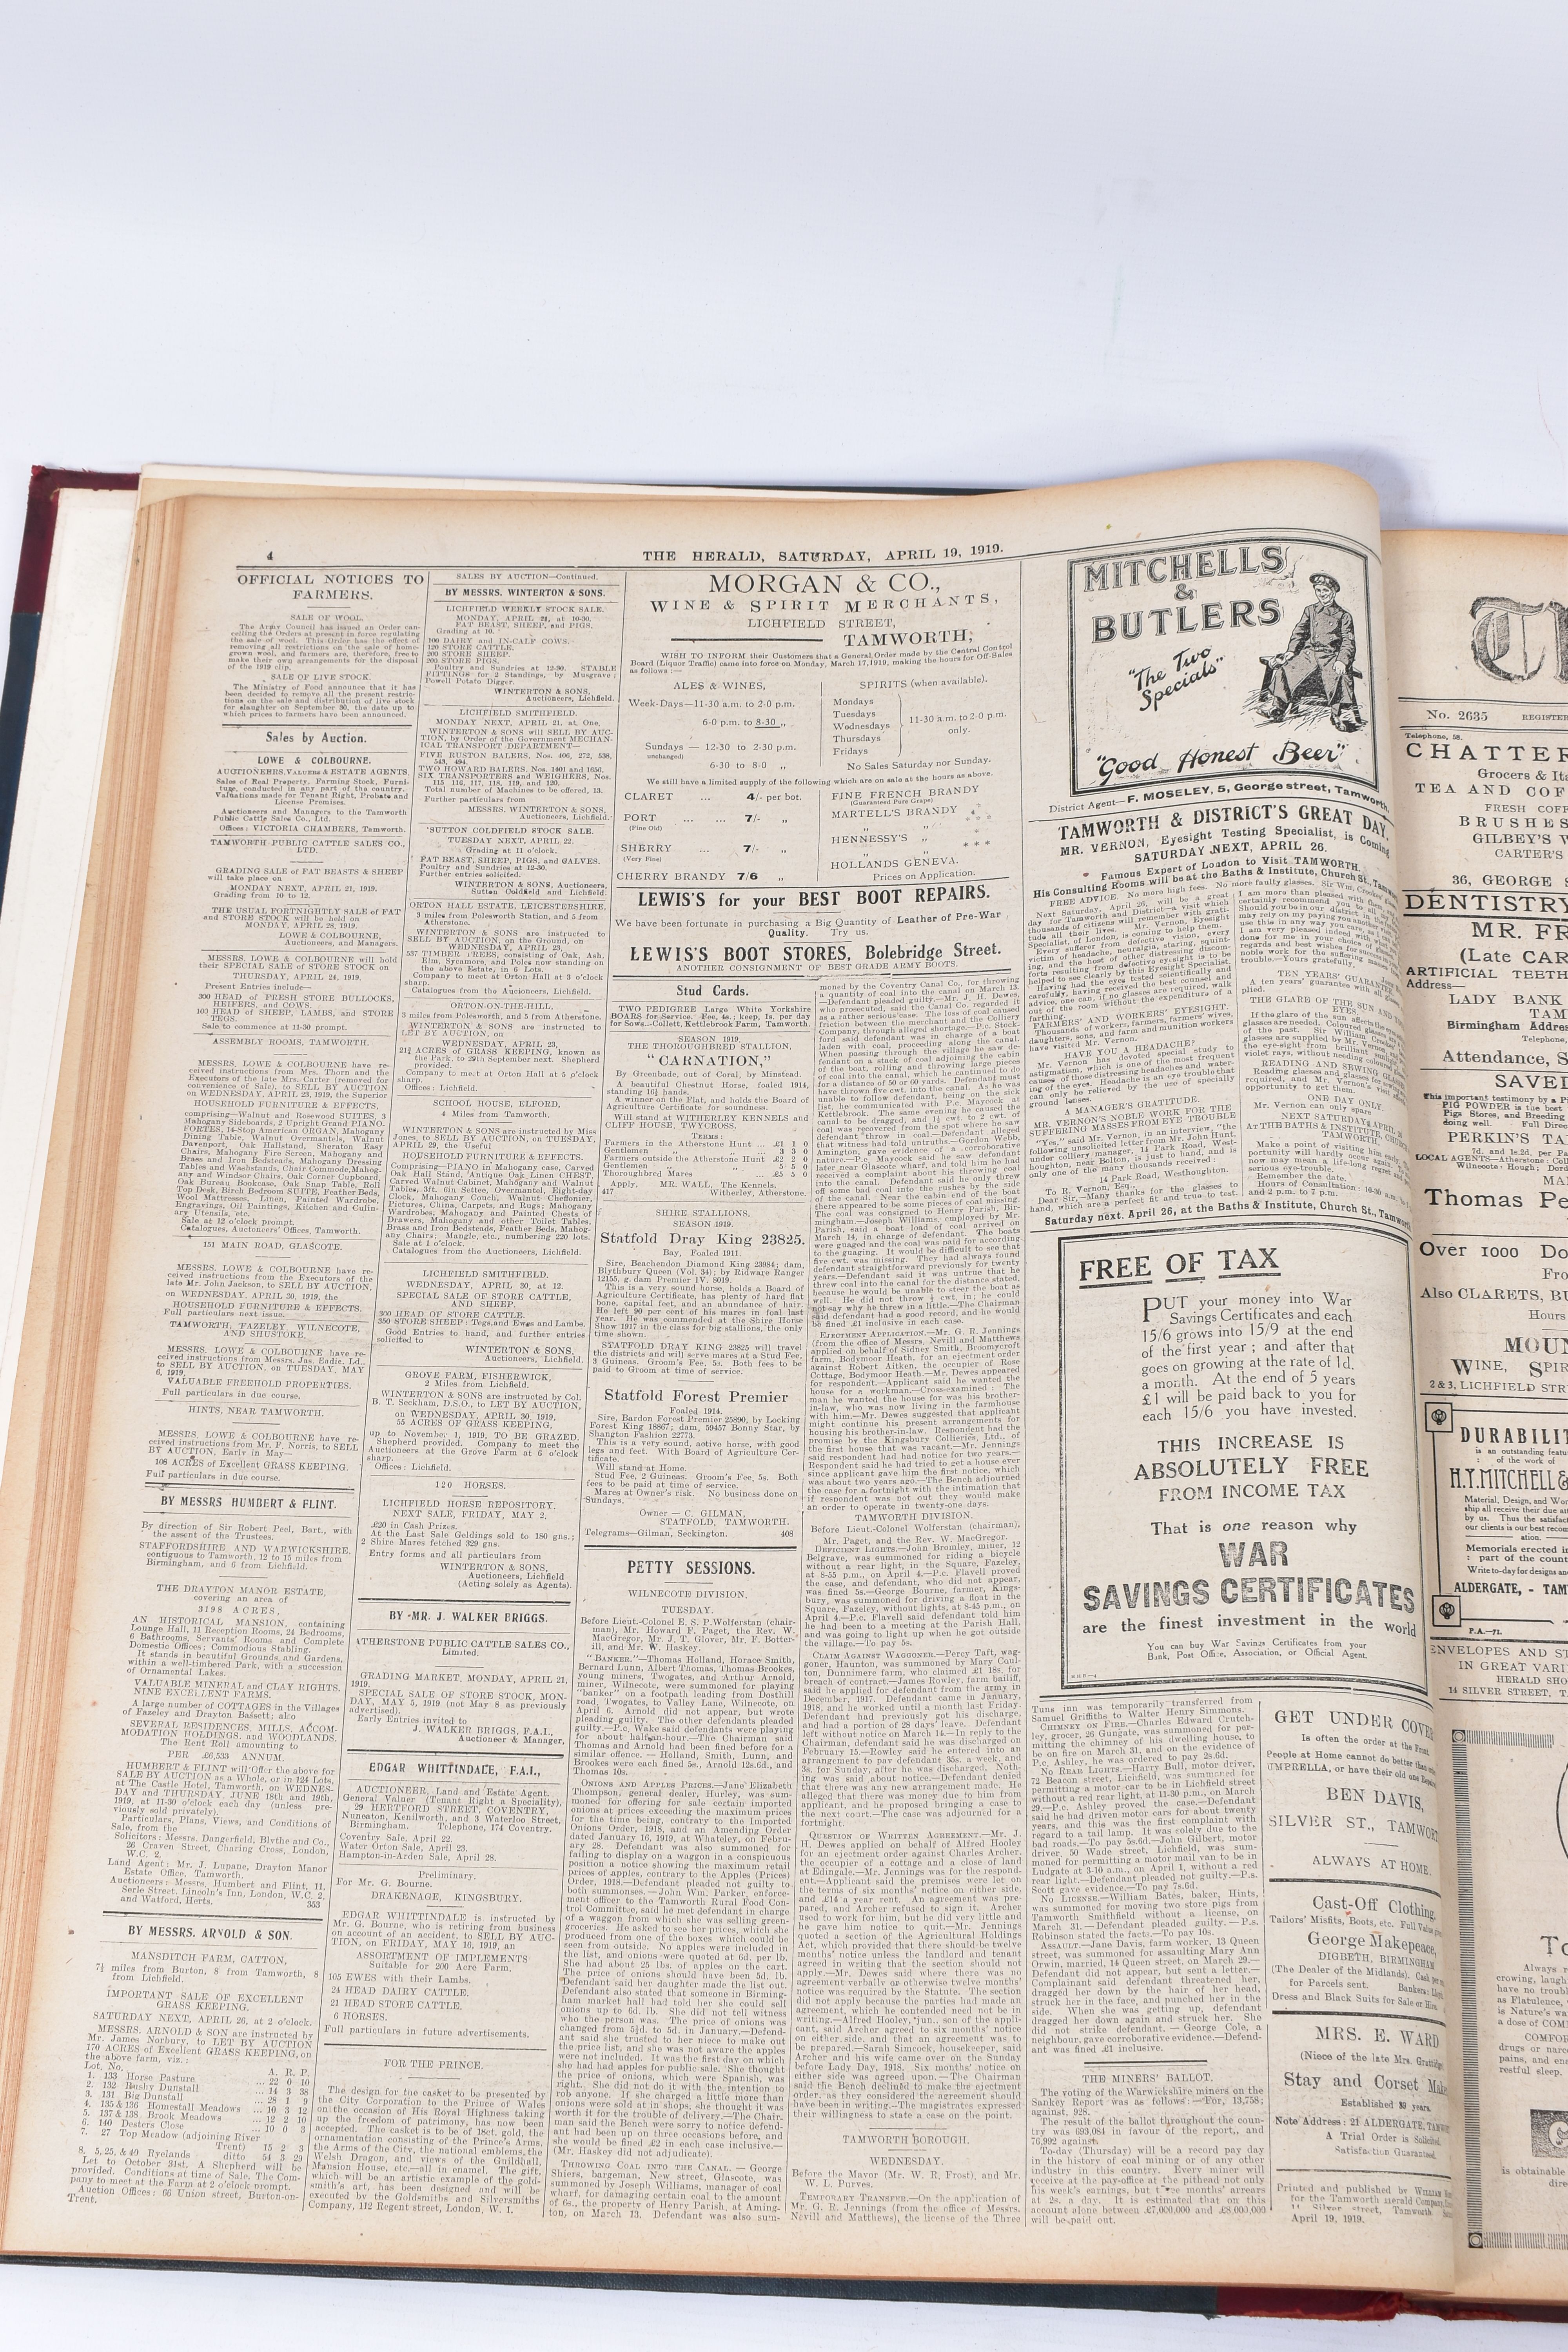 THE TAMWORTH HERALD, an Archive of the Tamworth Herald Newspaper from 1919, the newspapers are bound - Image 3 of 9